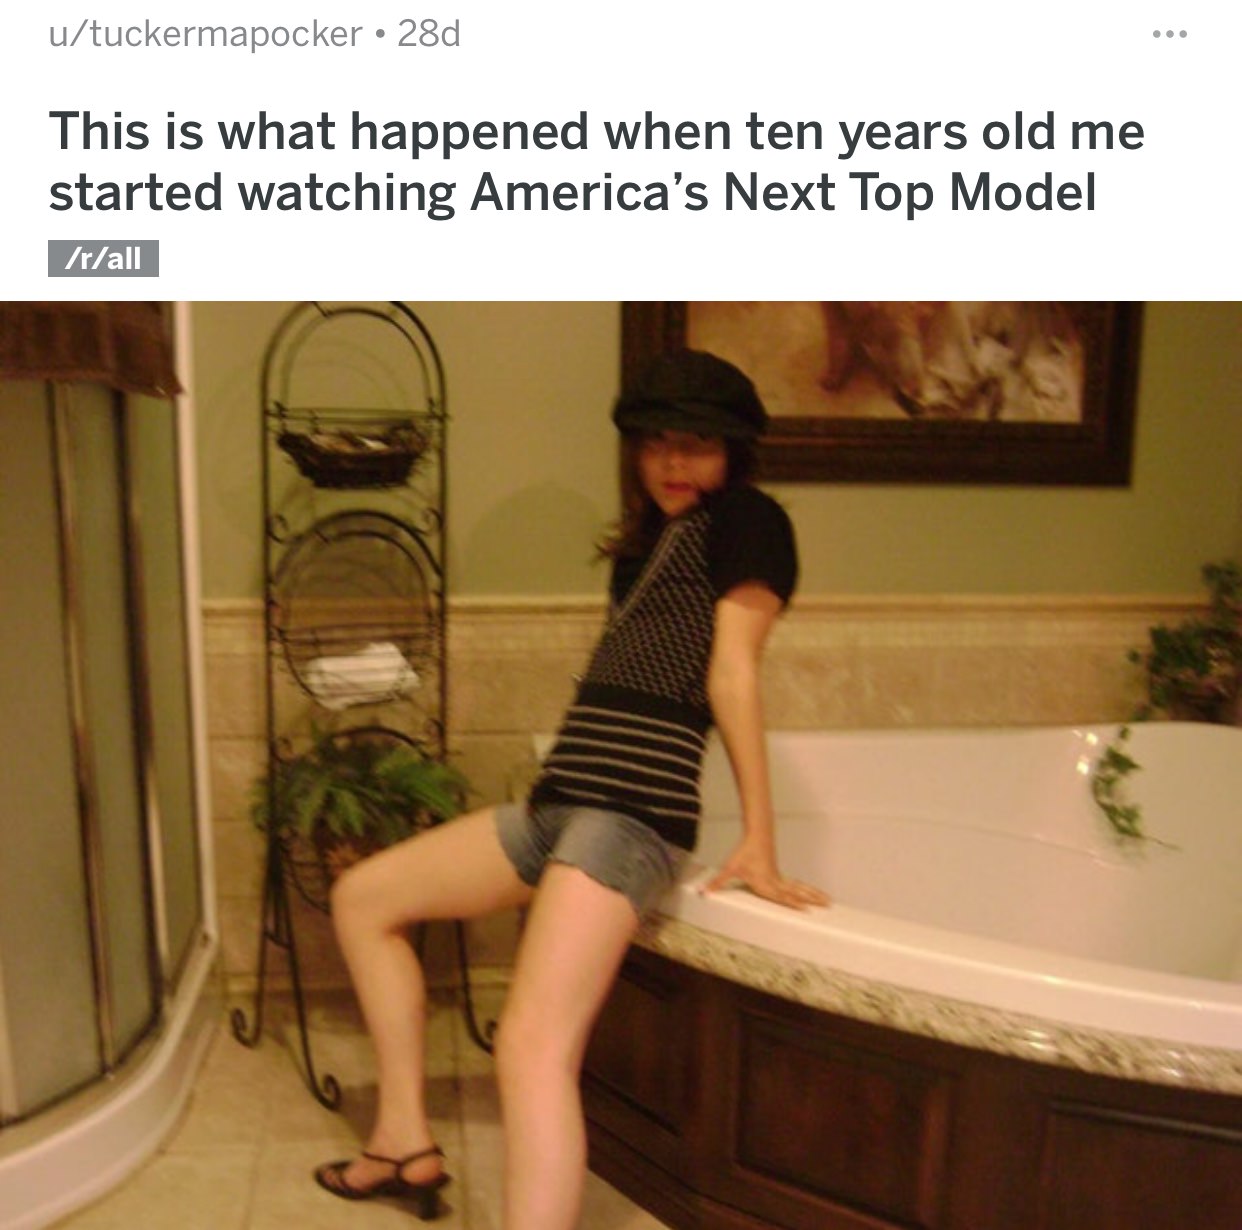 shoulder - utuckermapocker 28d This is what happened when ten years old me started watching America's Next Top Model rall